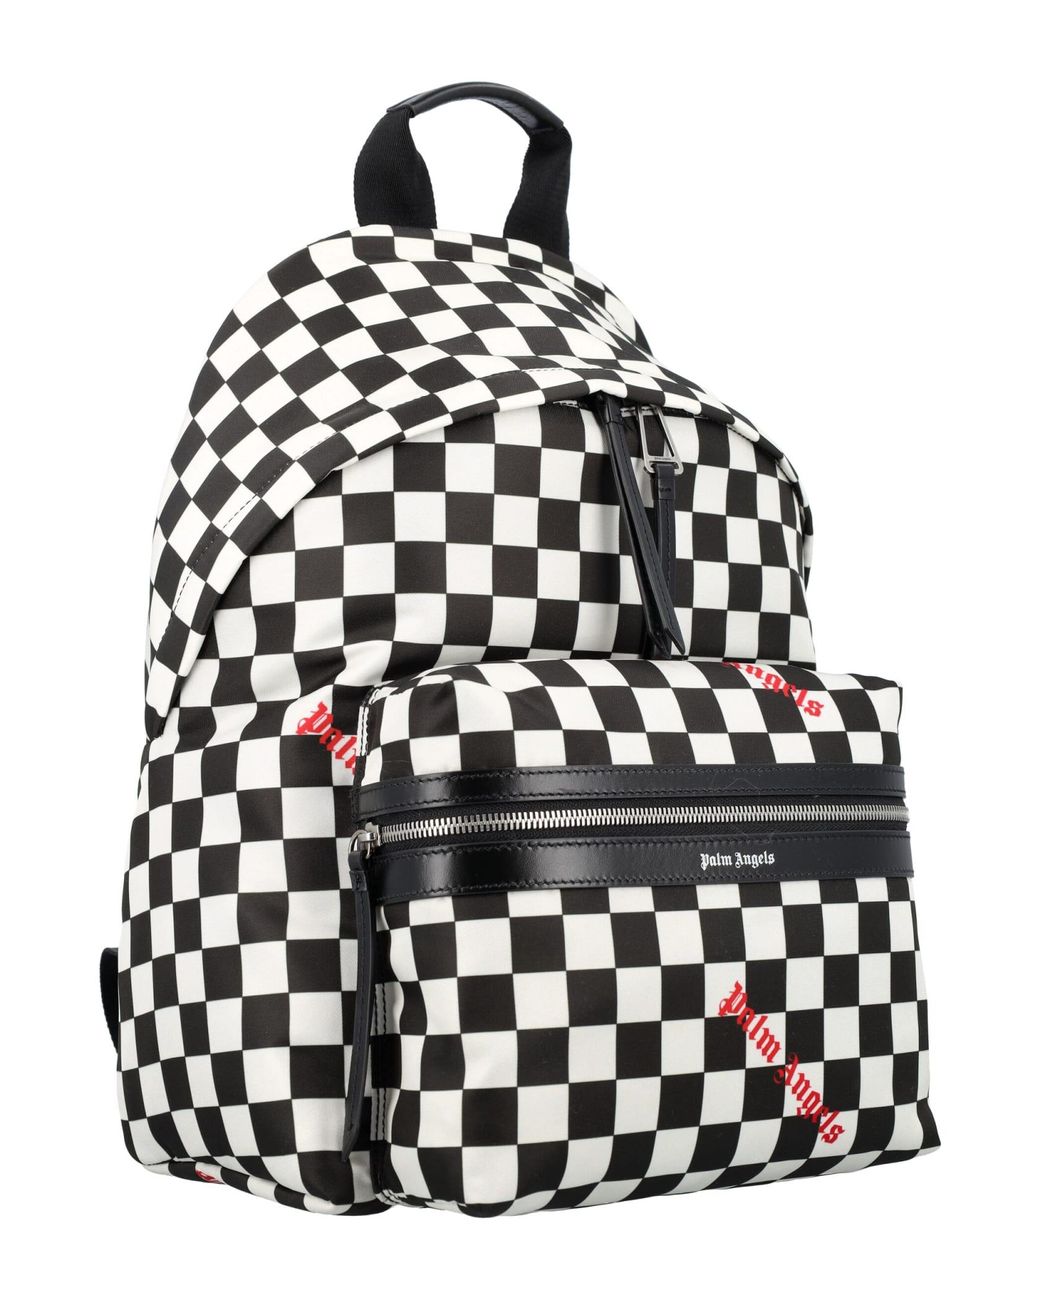 Palm Angels Synthetic Damier Backpack in Black for Men Mens Bags Backpacks Save 53% 